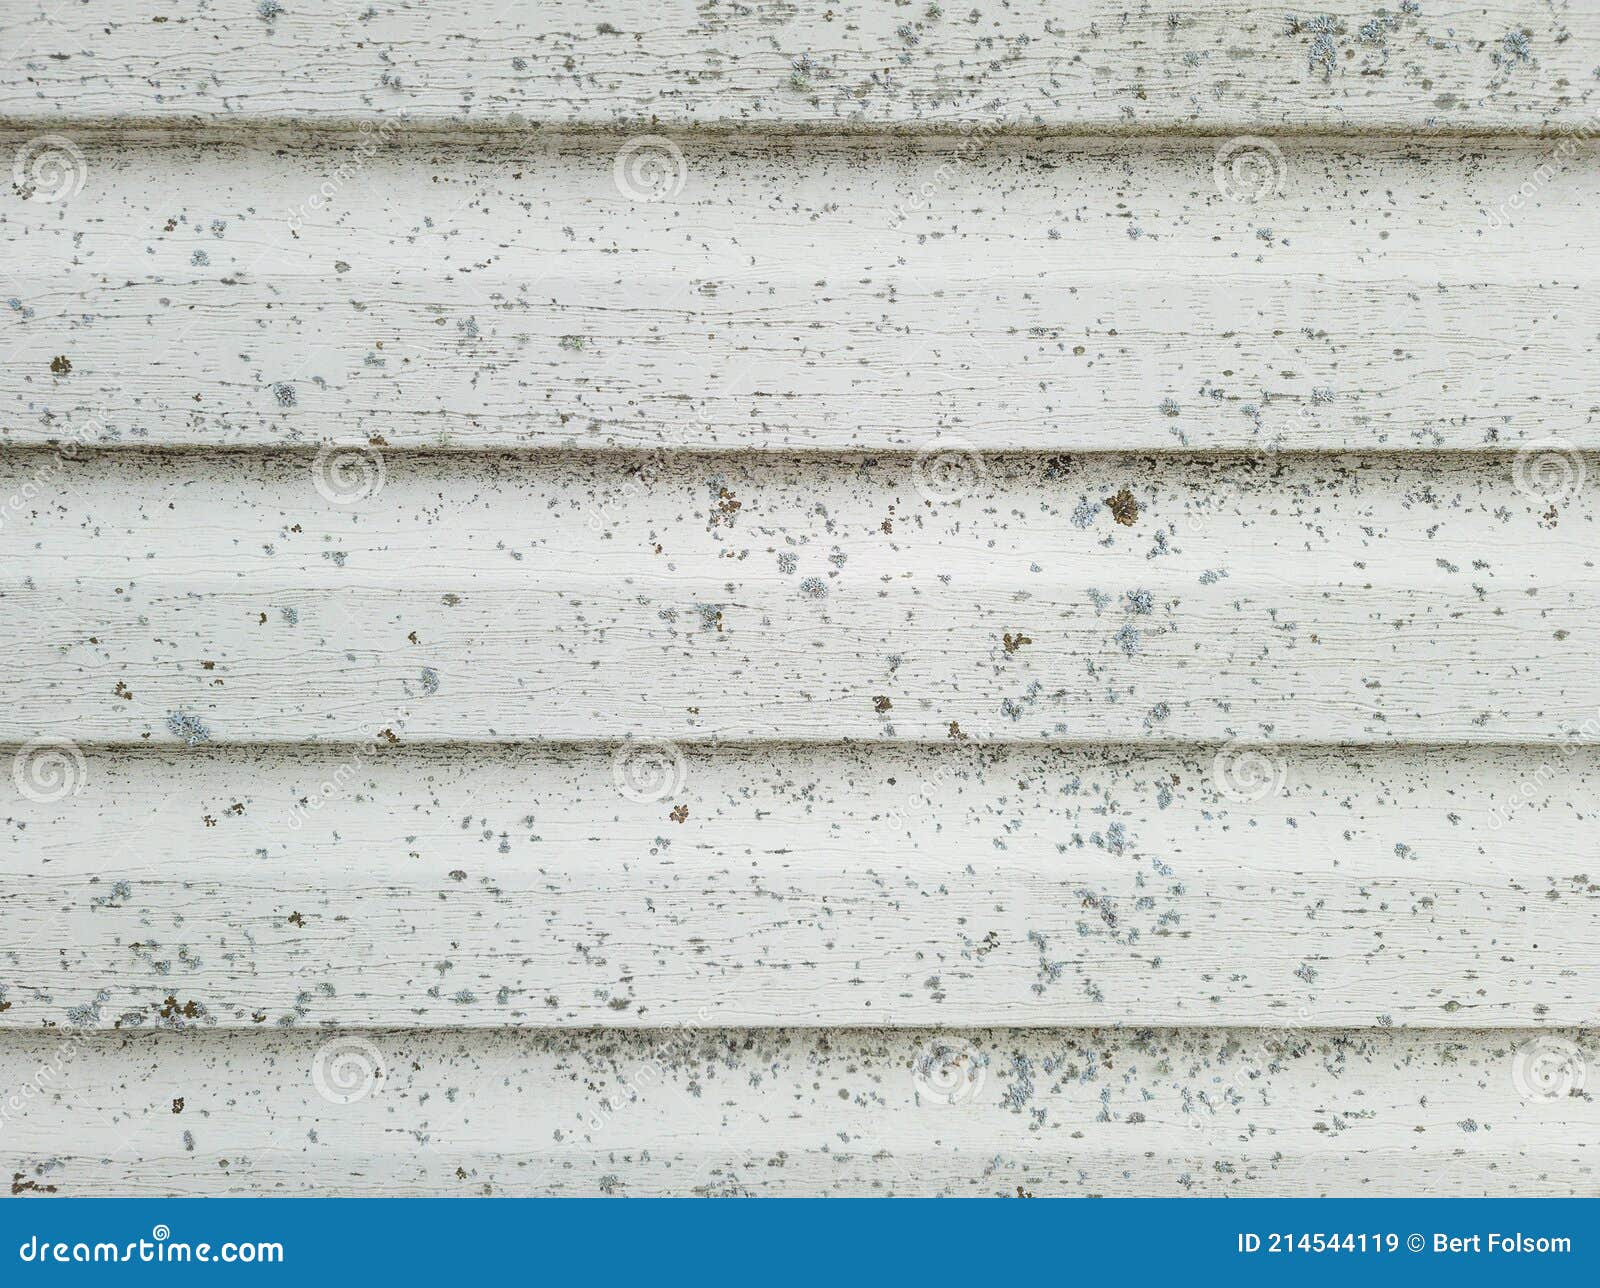 Vinyl Siding with Buildup of Lichen and Dirt Stock Image - Image of mold,  repair: 214544119